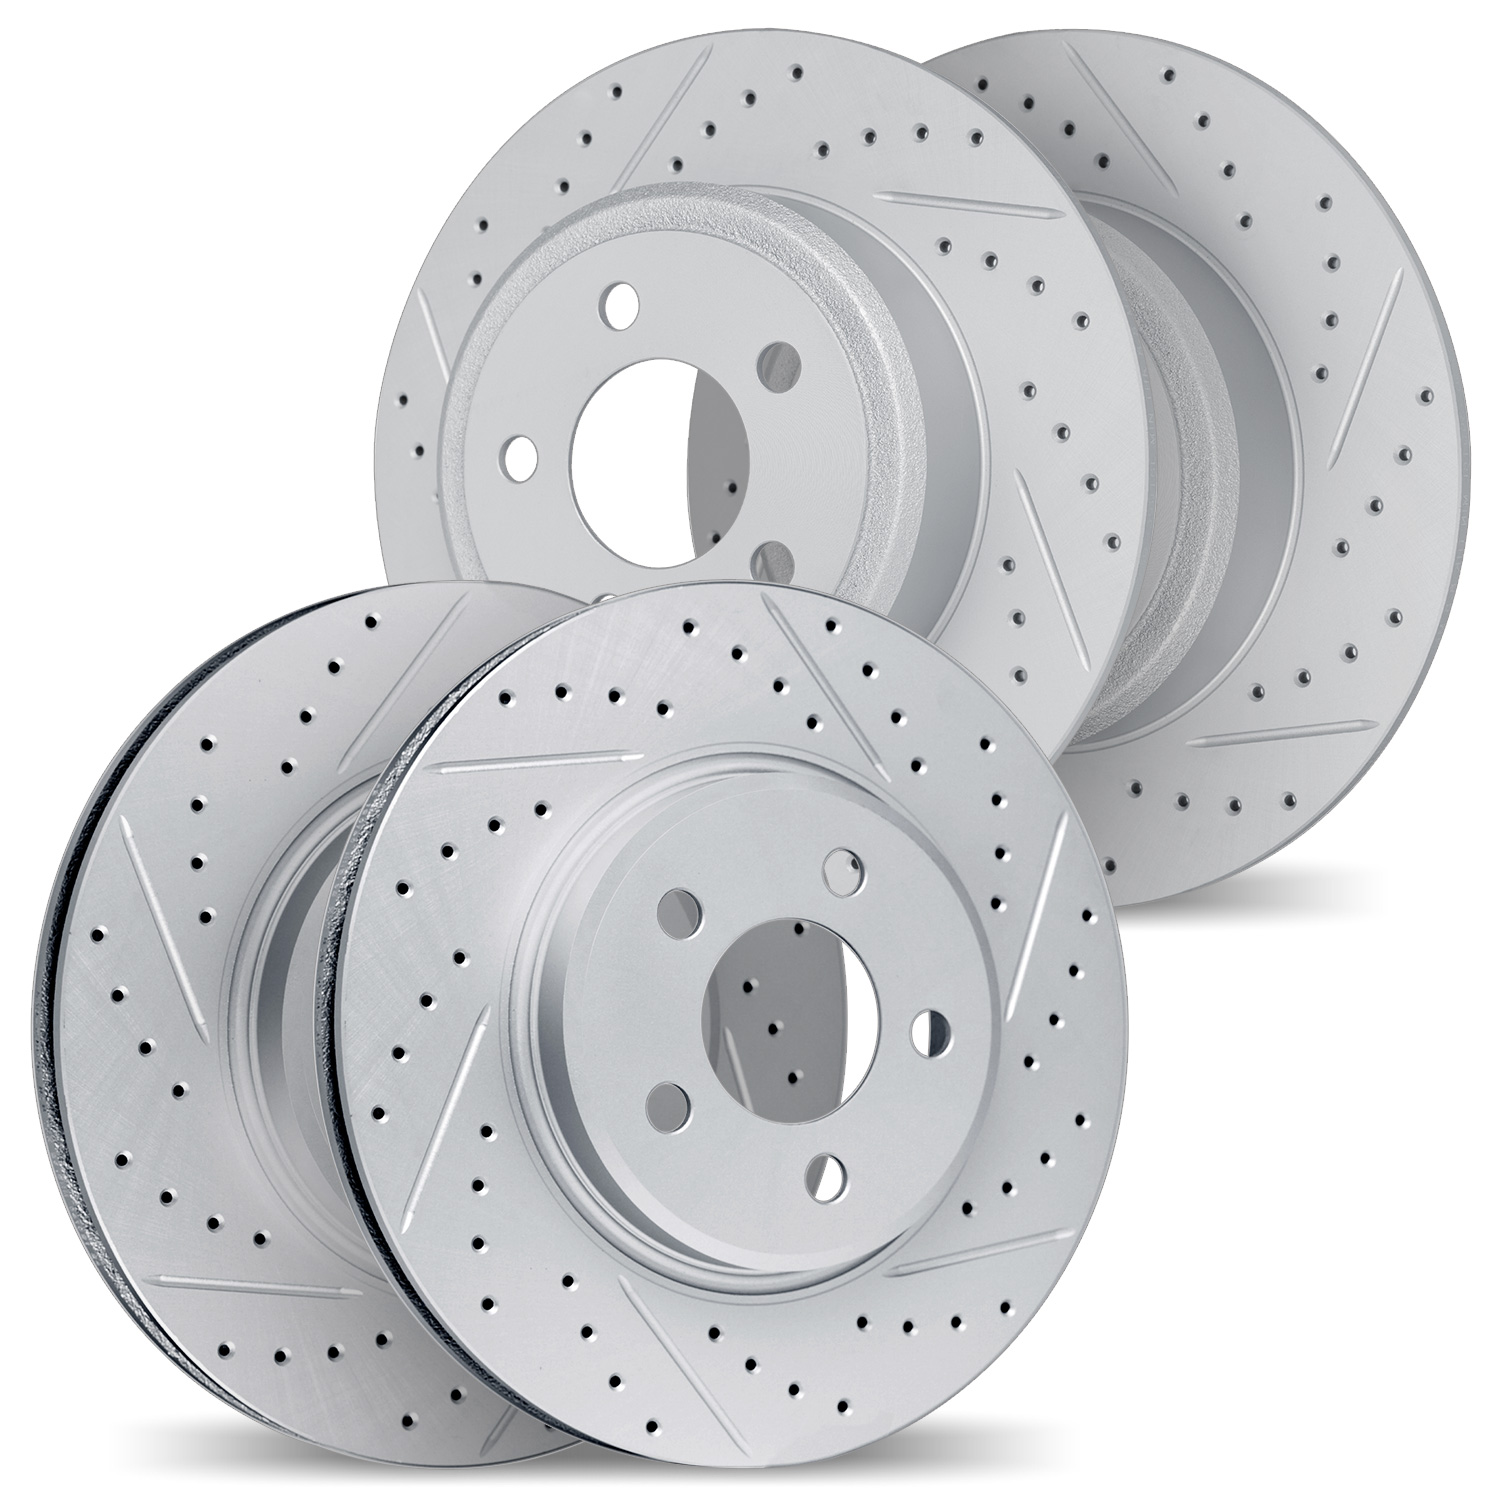 2004-76044 Geoperformance Drilled/Slotted Brake Rotors, Fits Select Lexus/Toyota/Scion, Position: Front and Rear